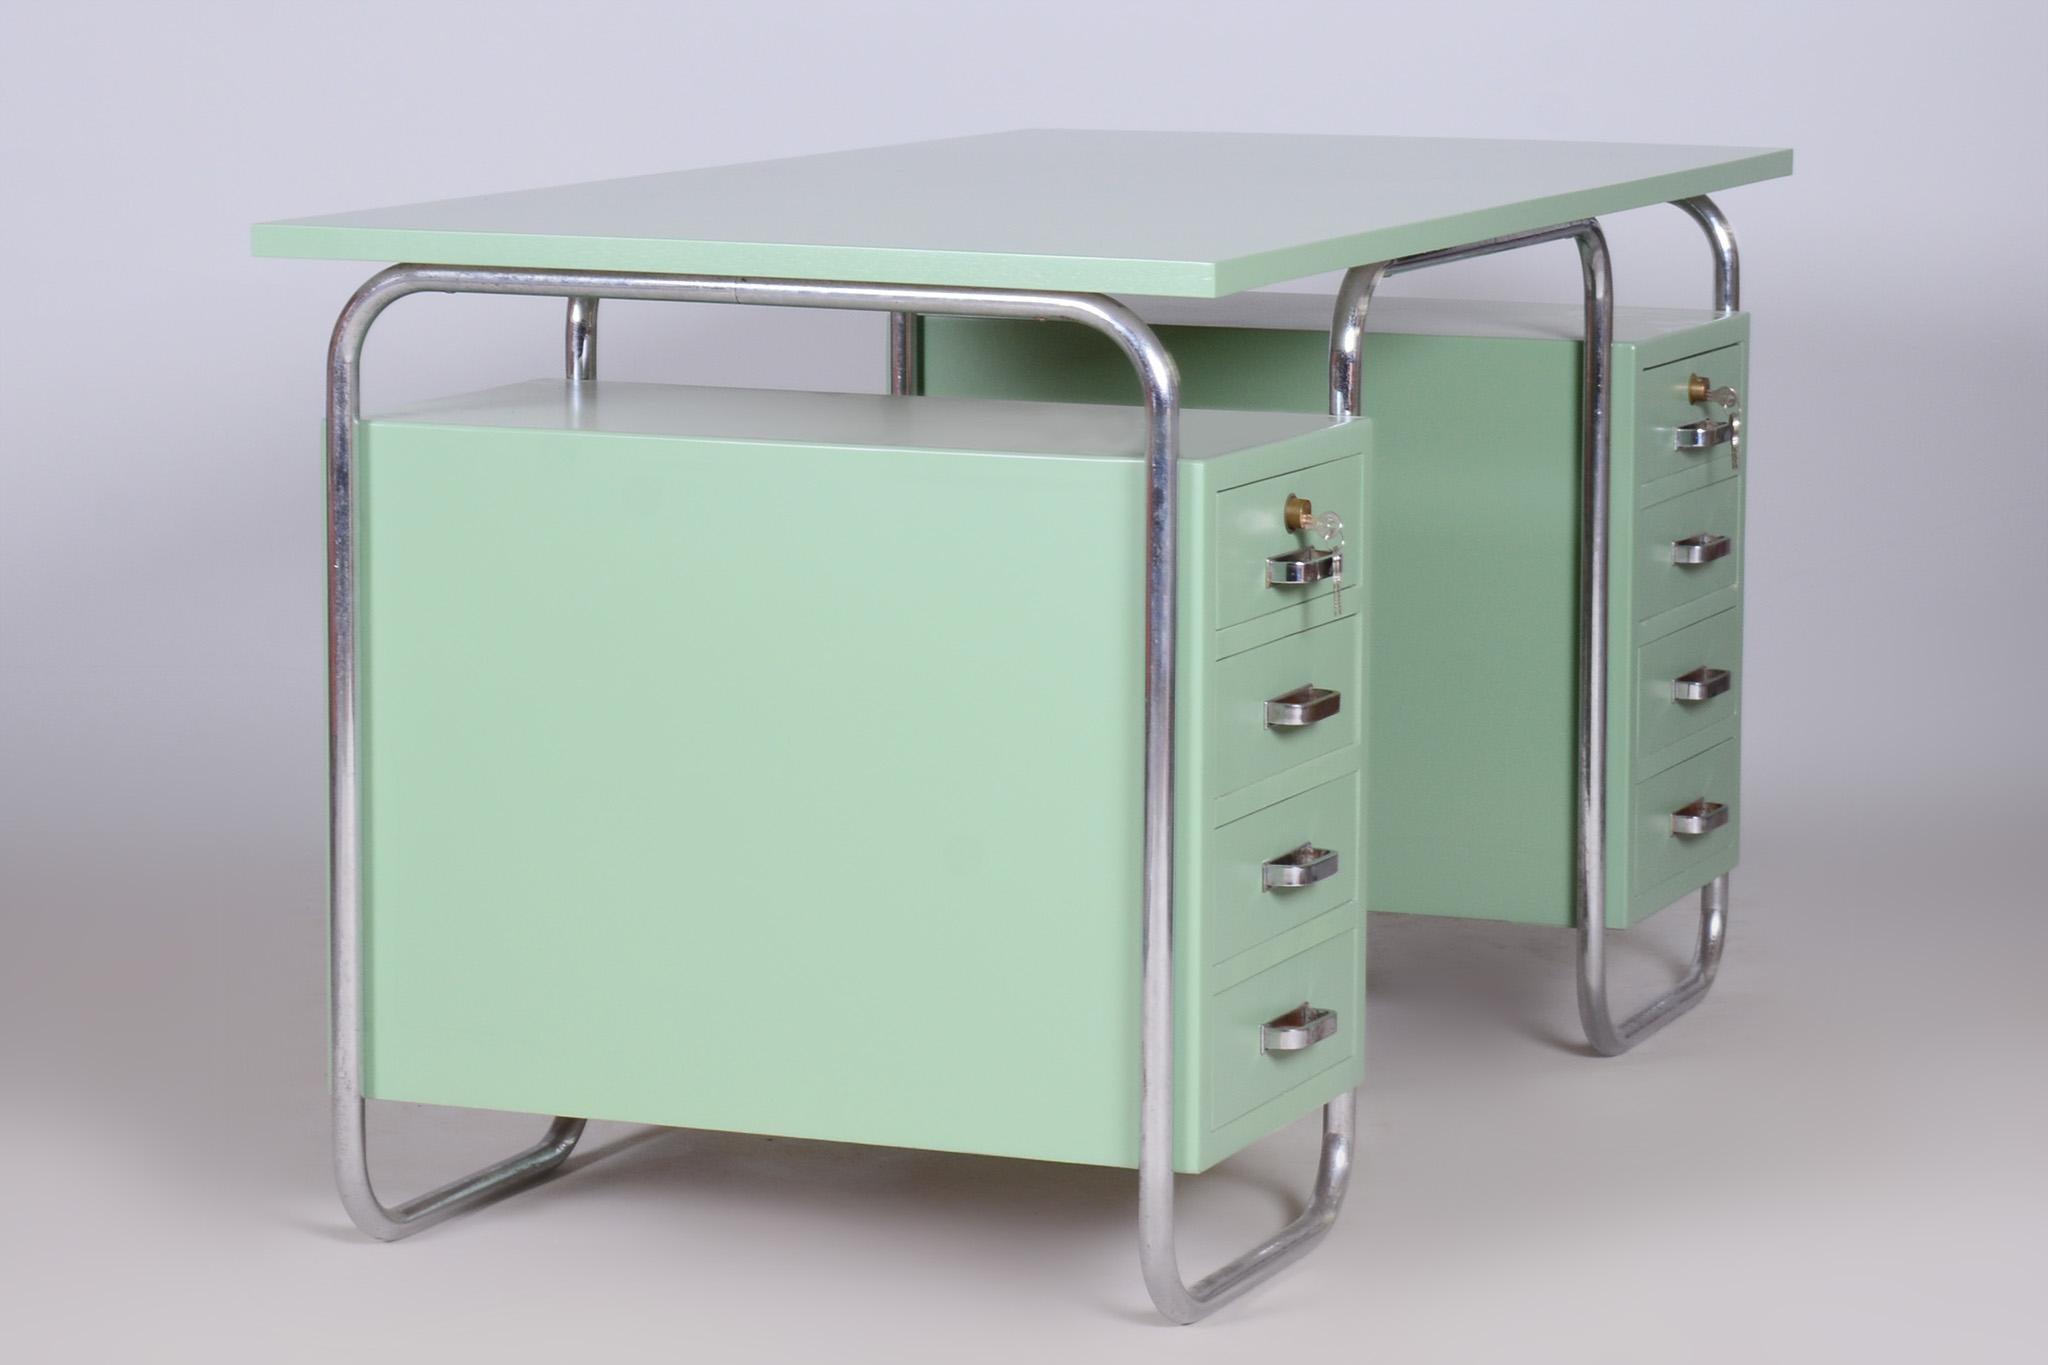 Bauhaus Writing Desk and Chair, Thonet, Chrome-Plated Steel, Czechia, 1930s For Sale 10